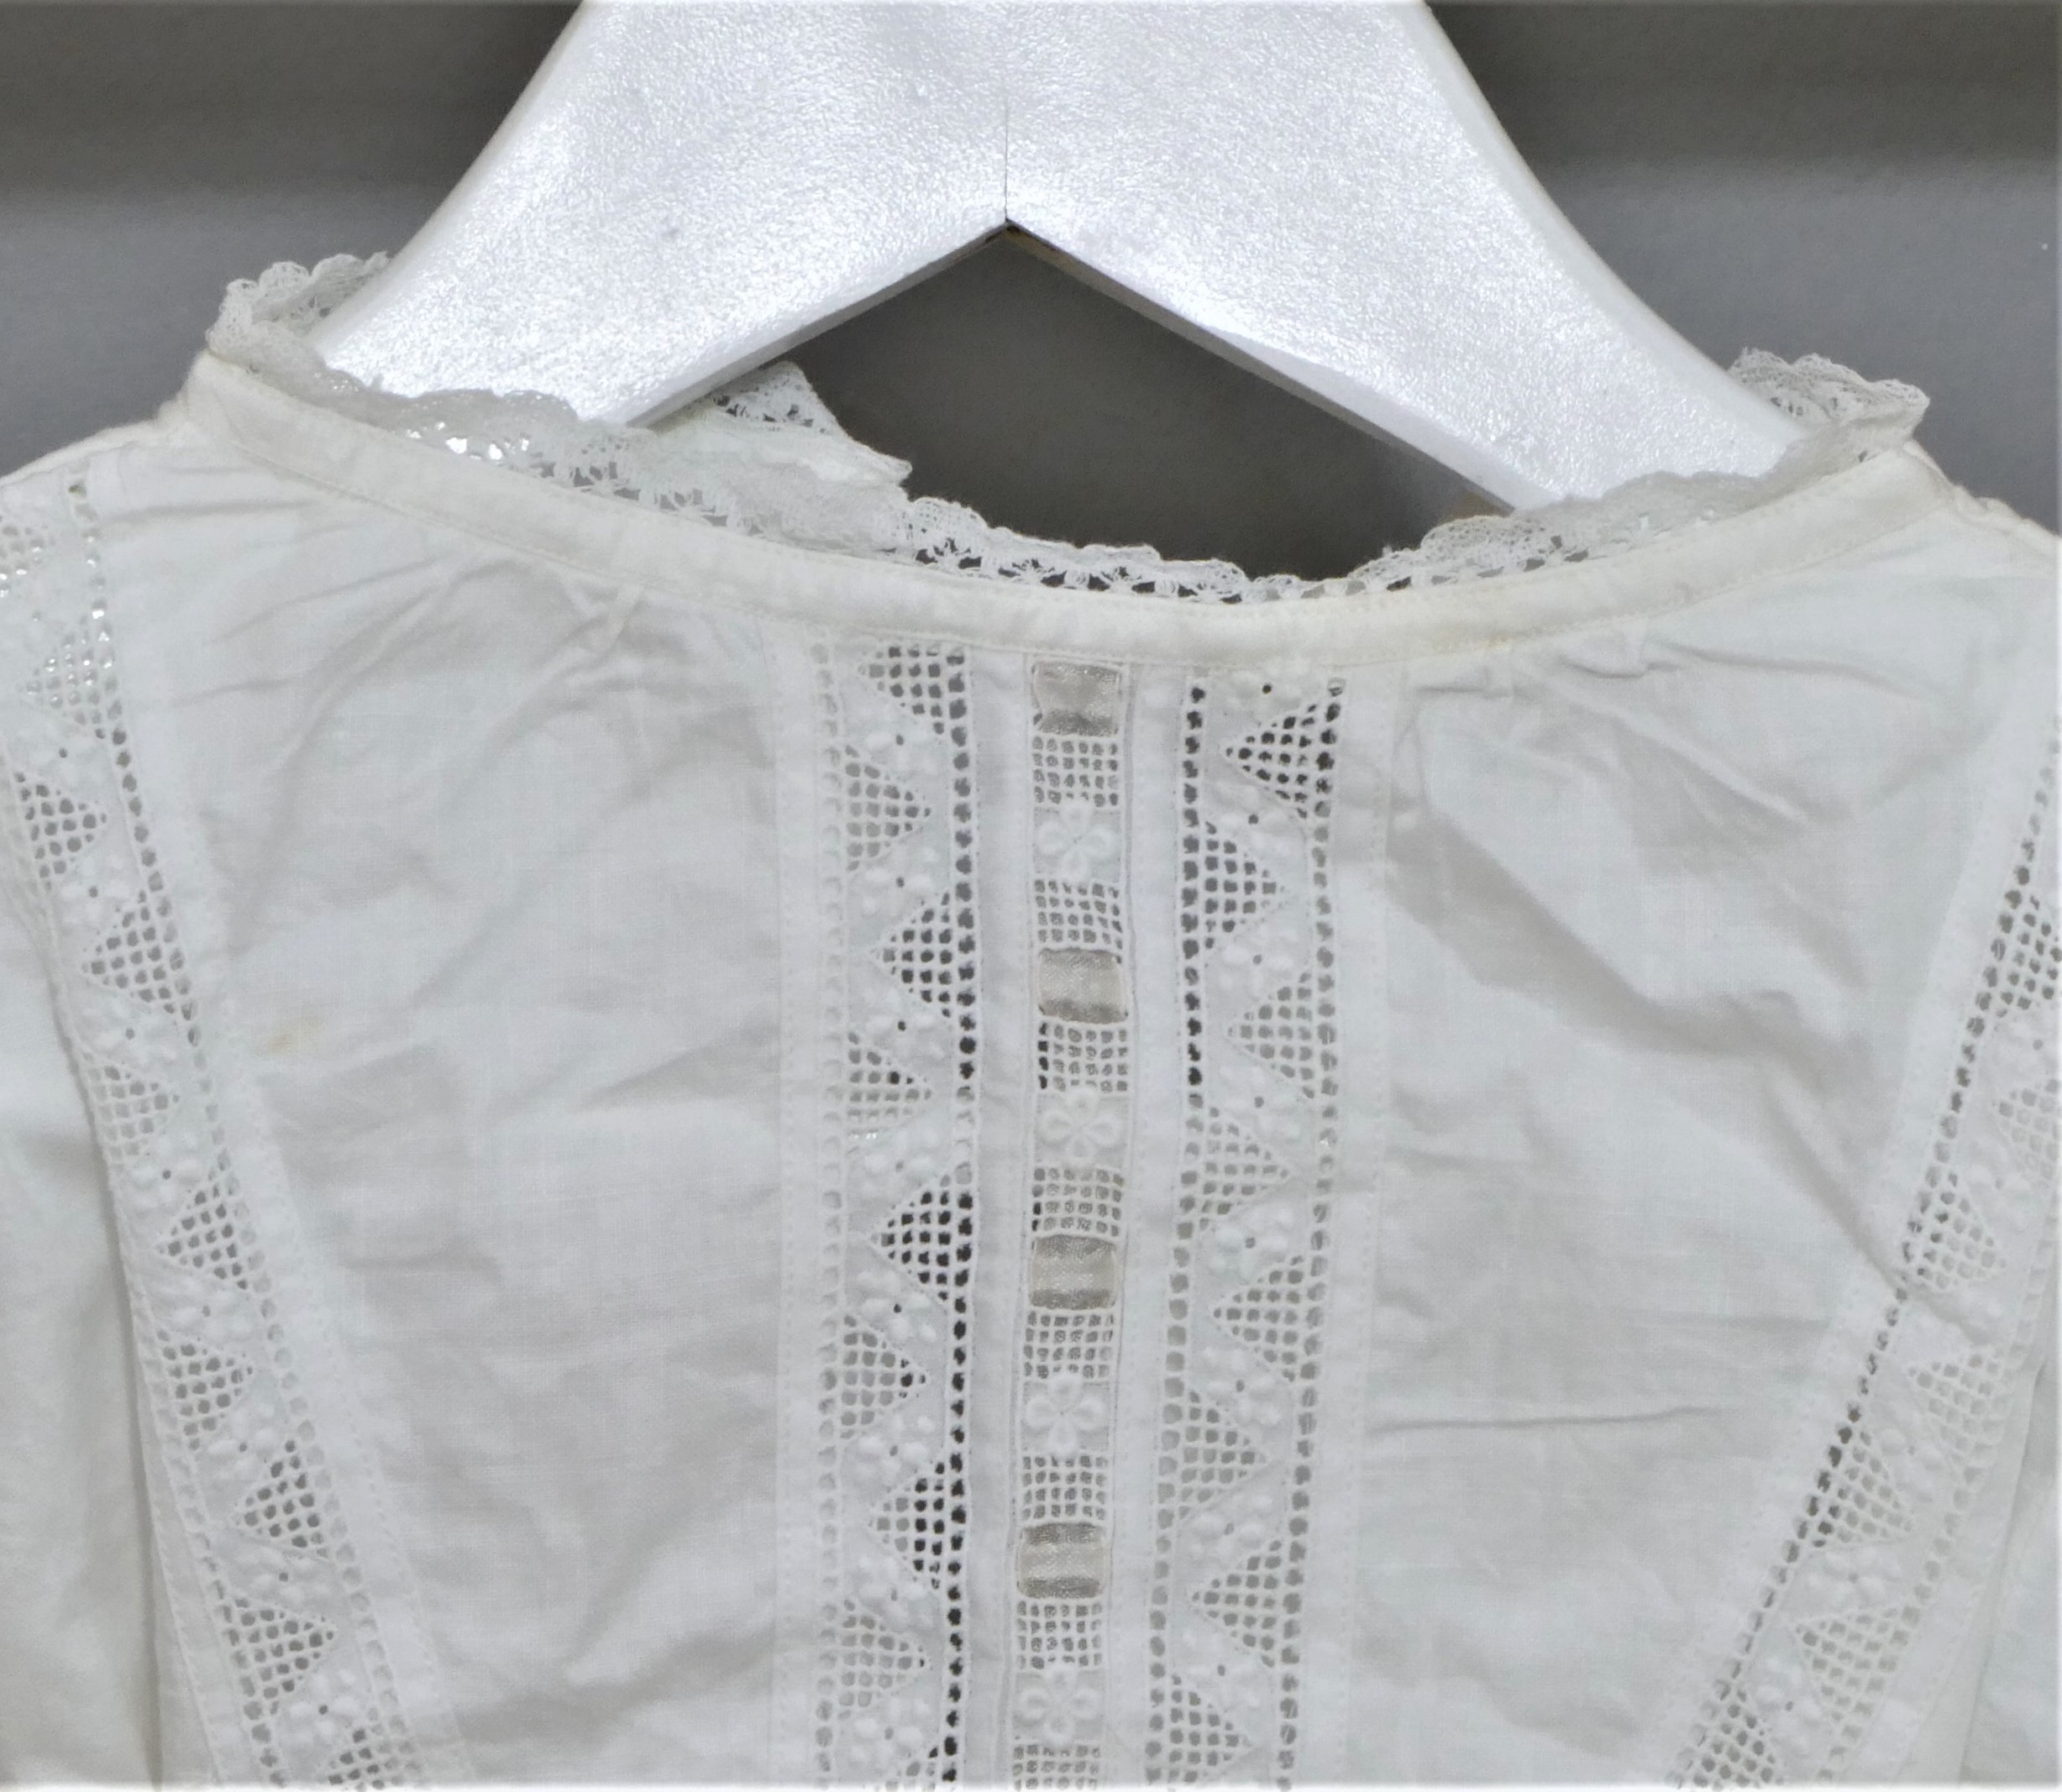 White cotton embroidered christening gowns and cream embroidered layettes. Average 64cm length (9) - Image 7 of 7